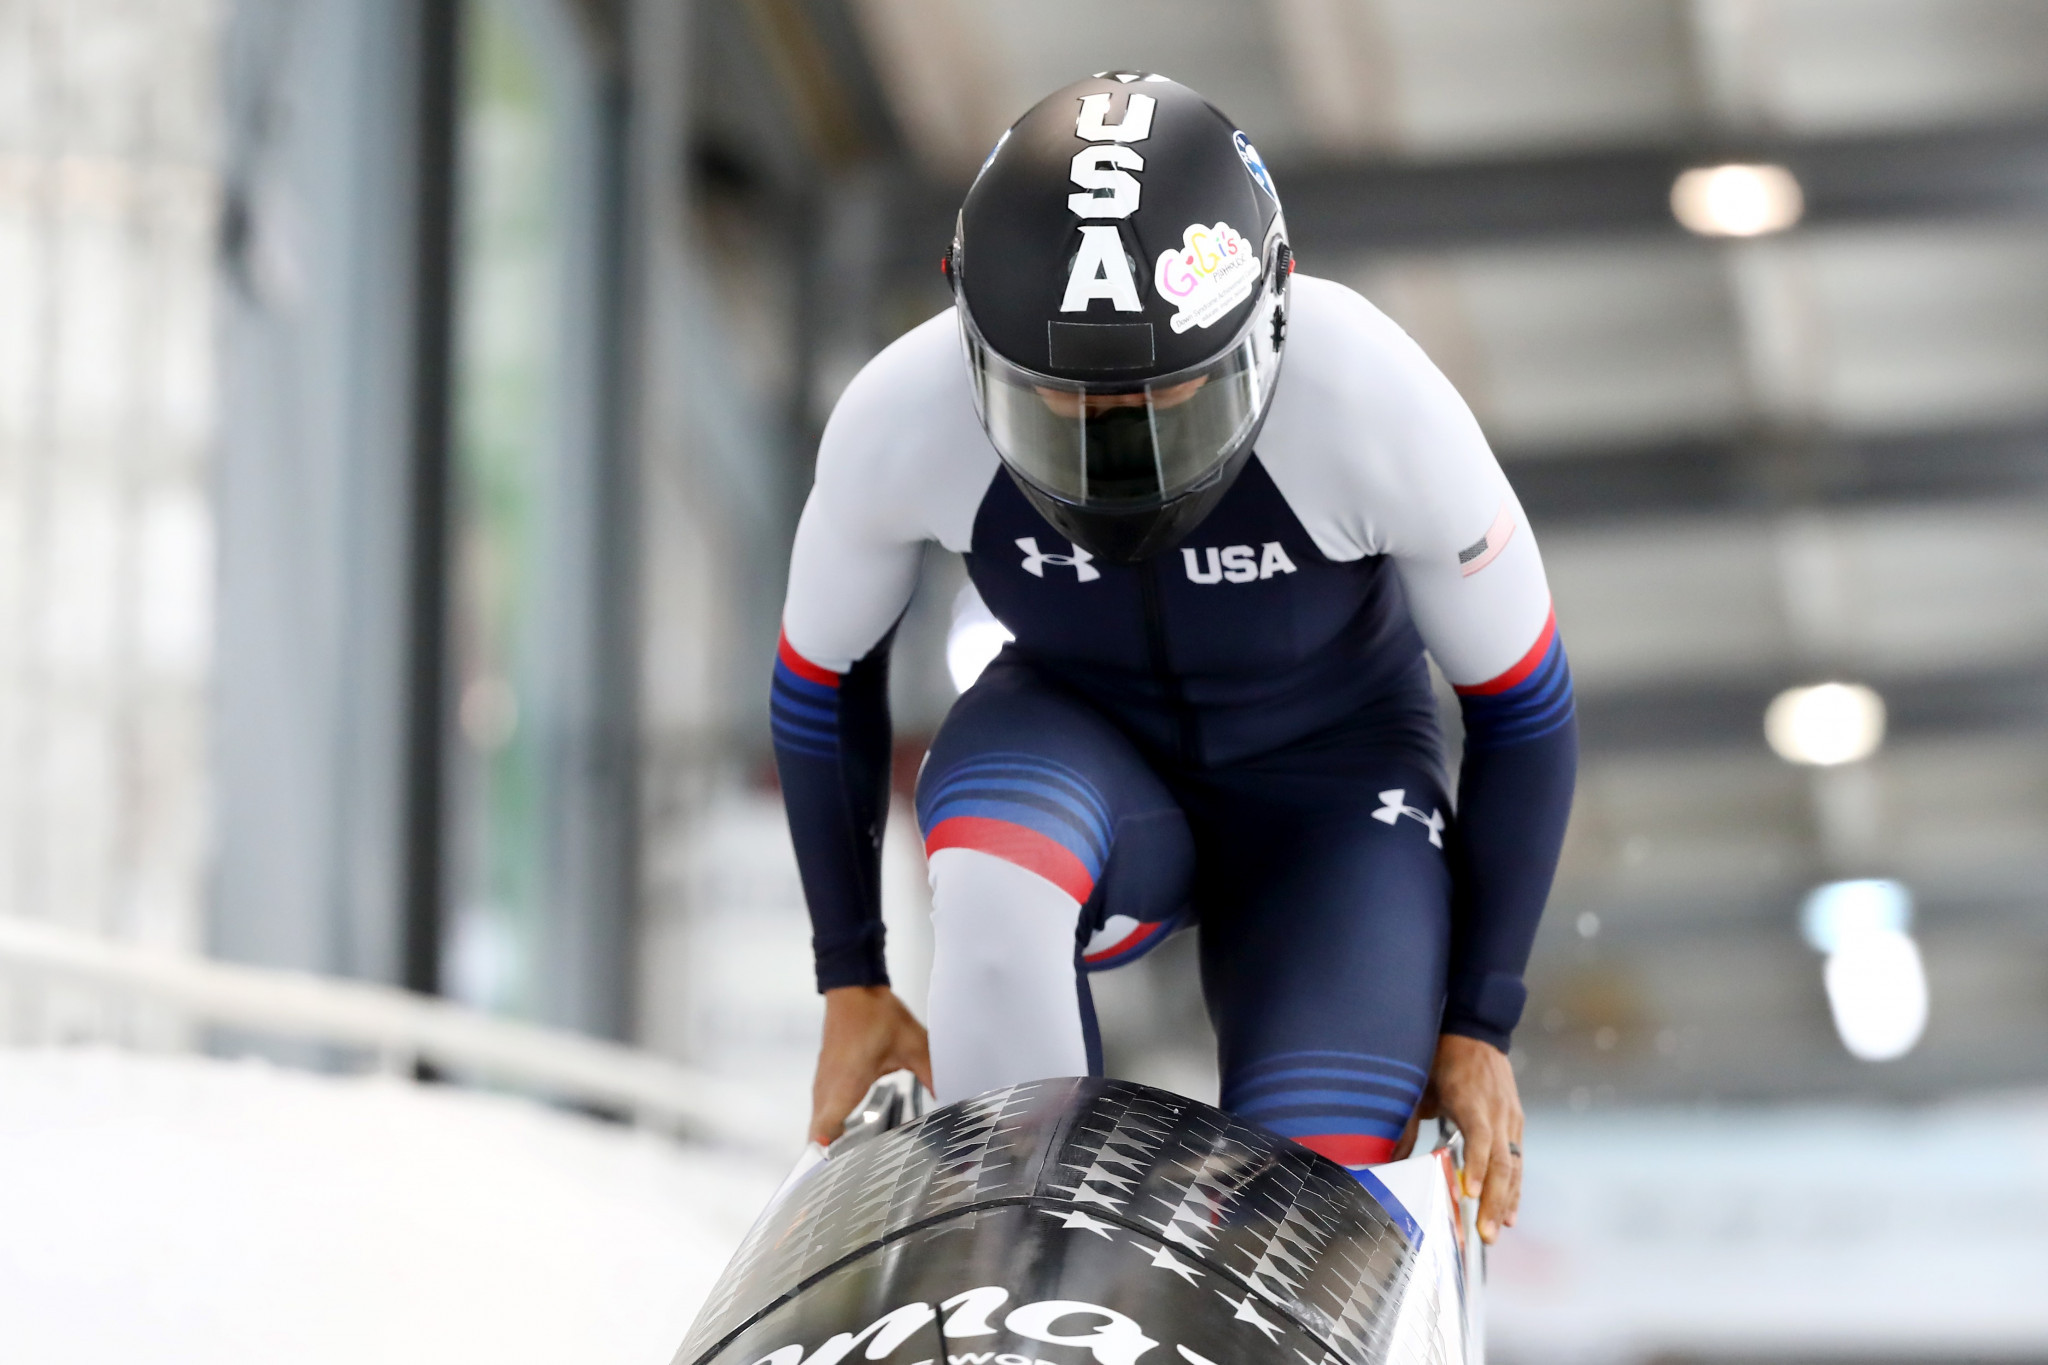 Elana Meyers Taylor will be aiming to secure gold in both the women's monobob and two-woman bobsleigh at Beijing 2022 ©Getty Images